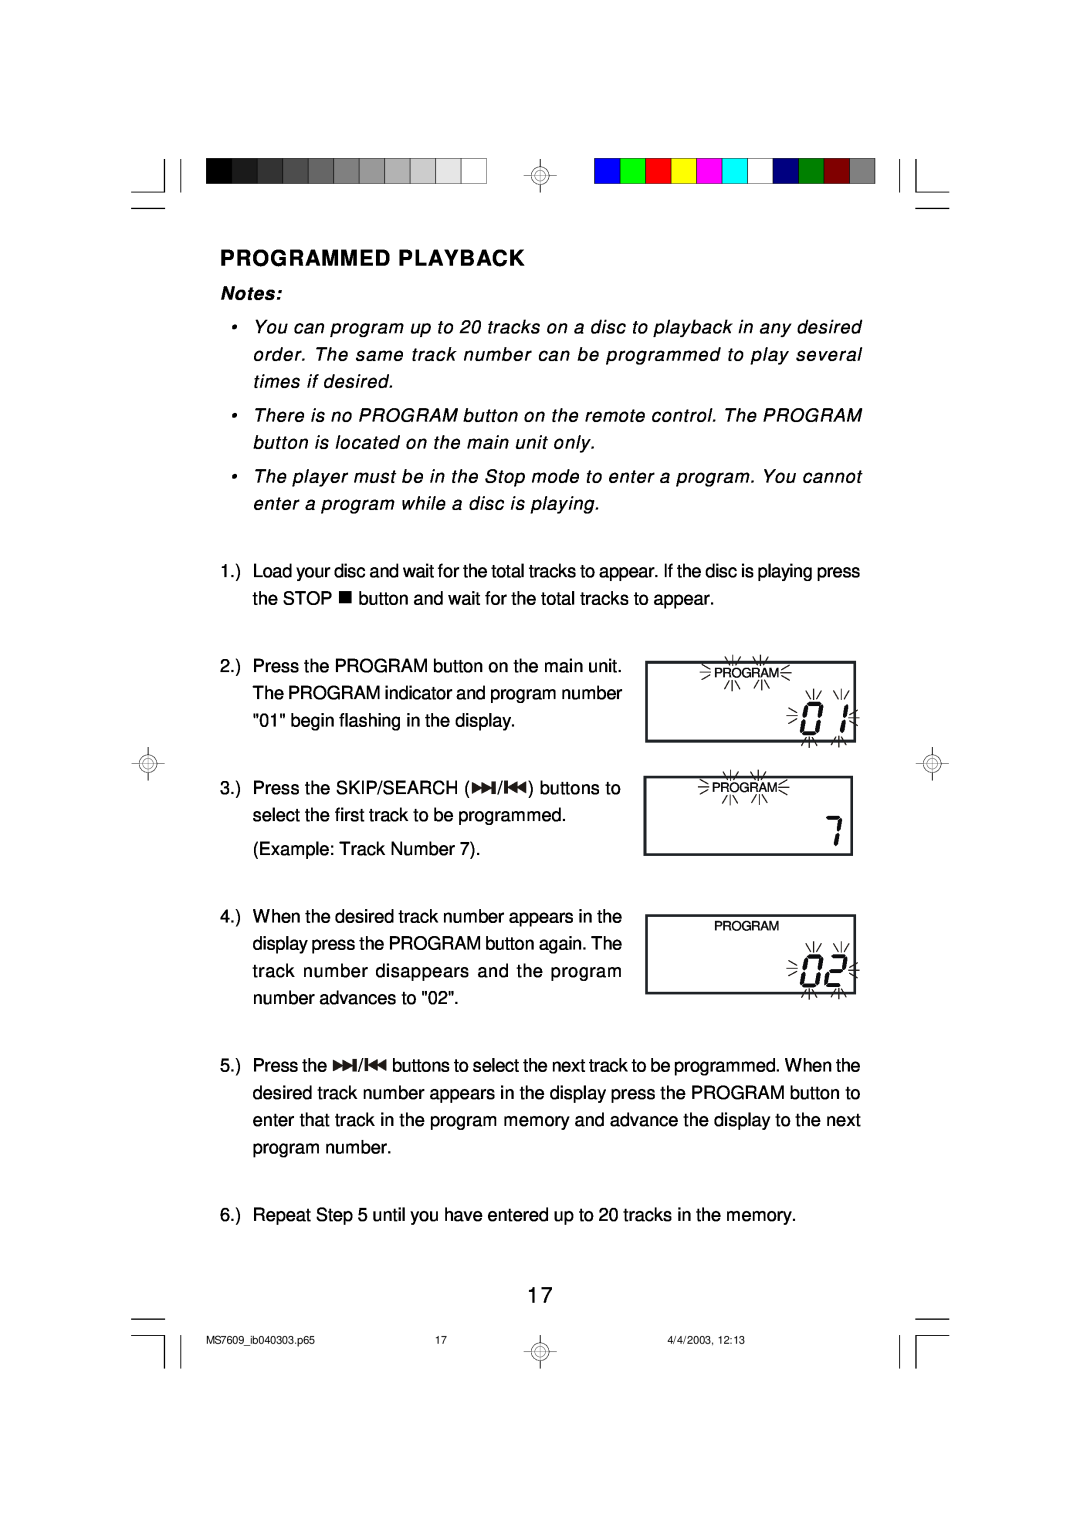 Emerson MS7609 owner manual Programmed Playback 